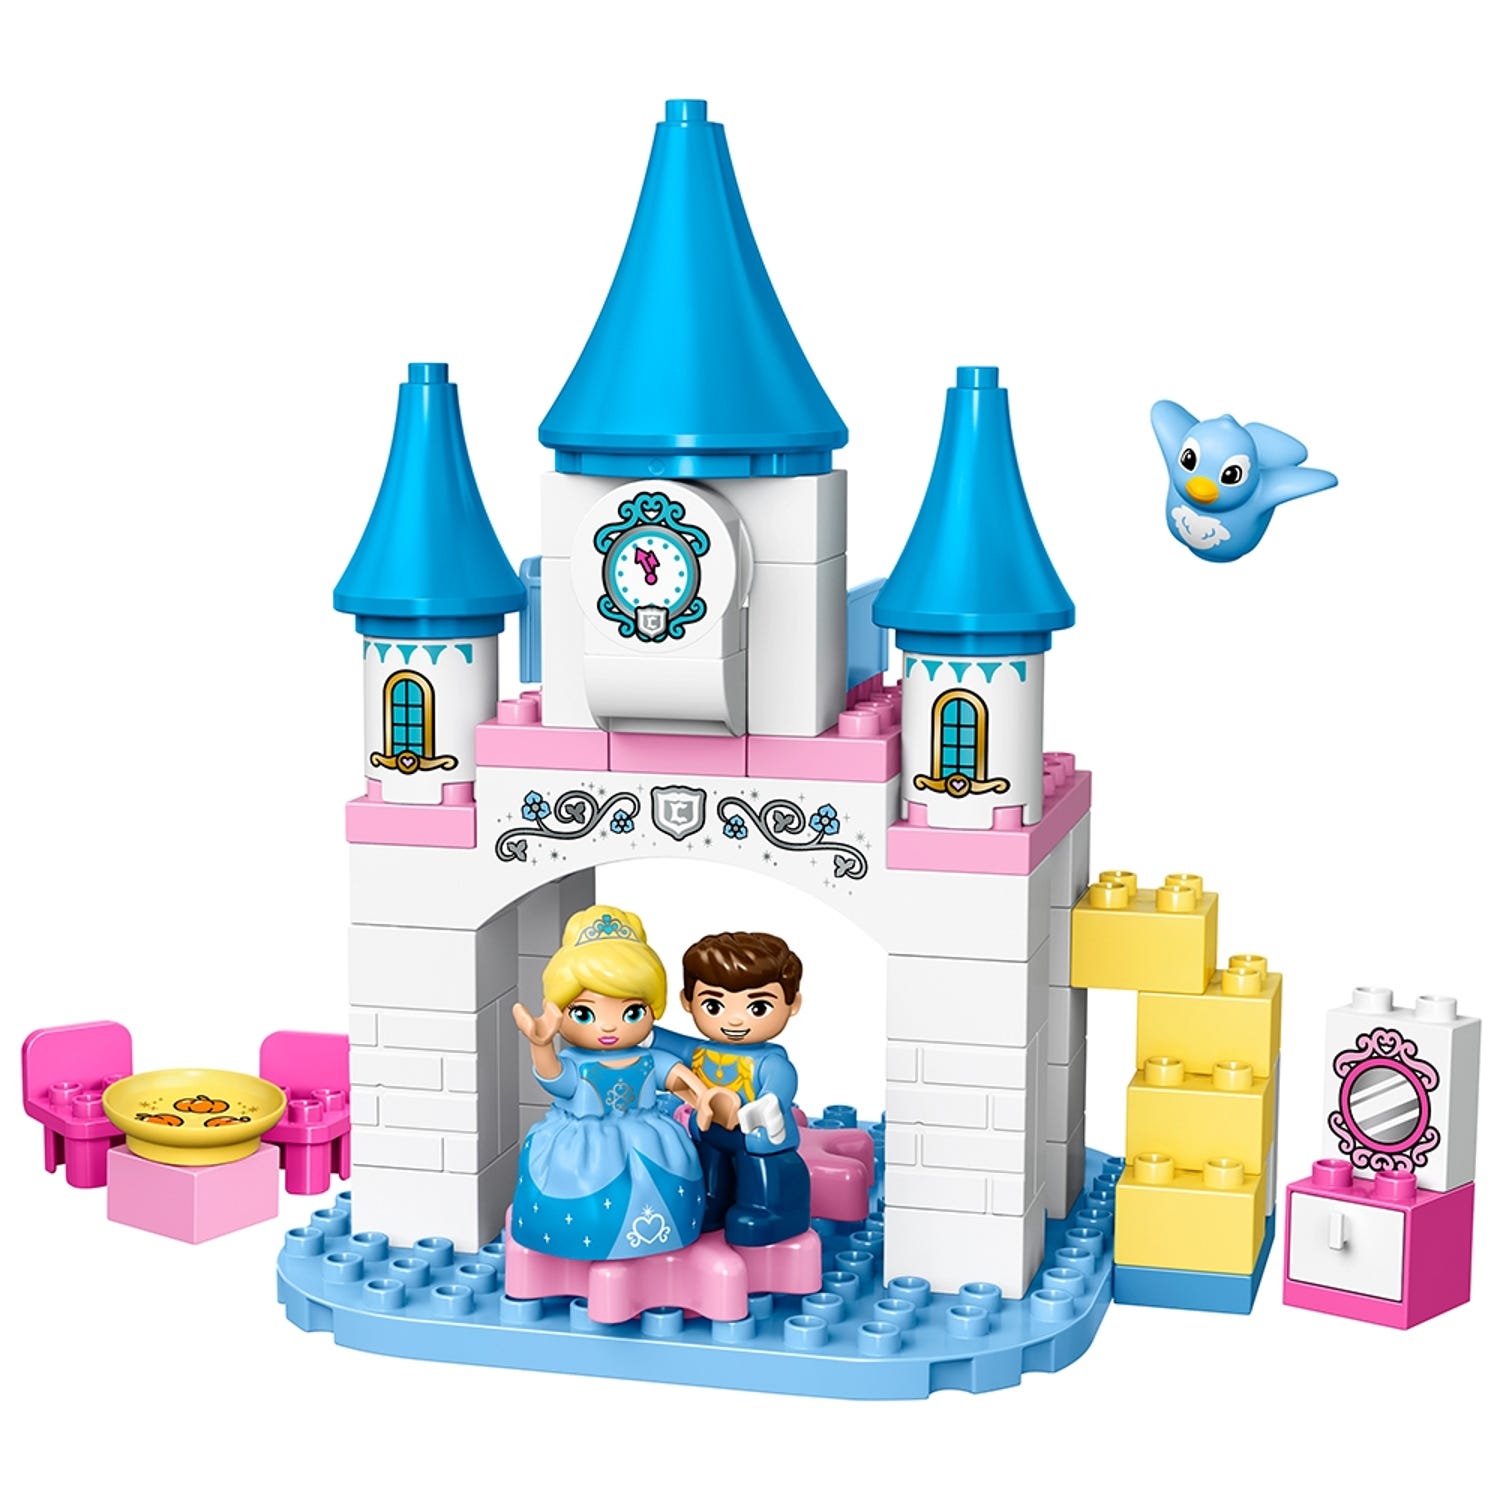 Cinderella´s Magical Castle 10855 | DUPLO® Buy online at the Official LEGO® Shop US